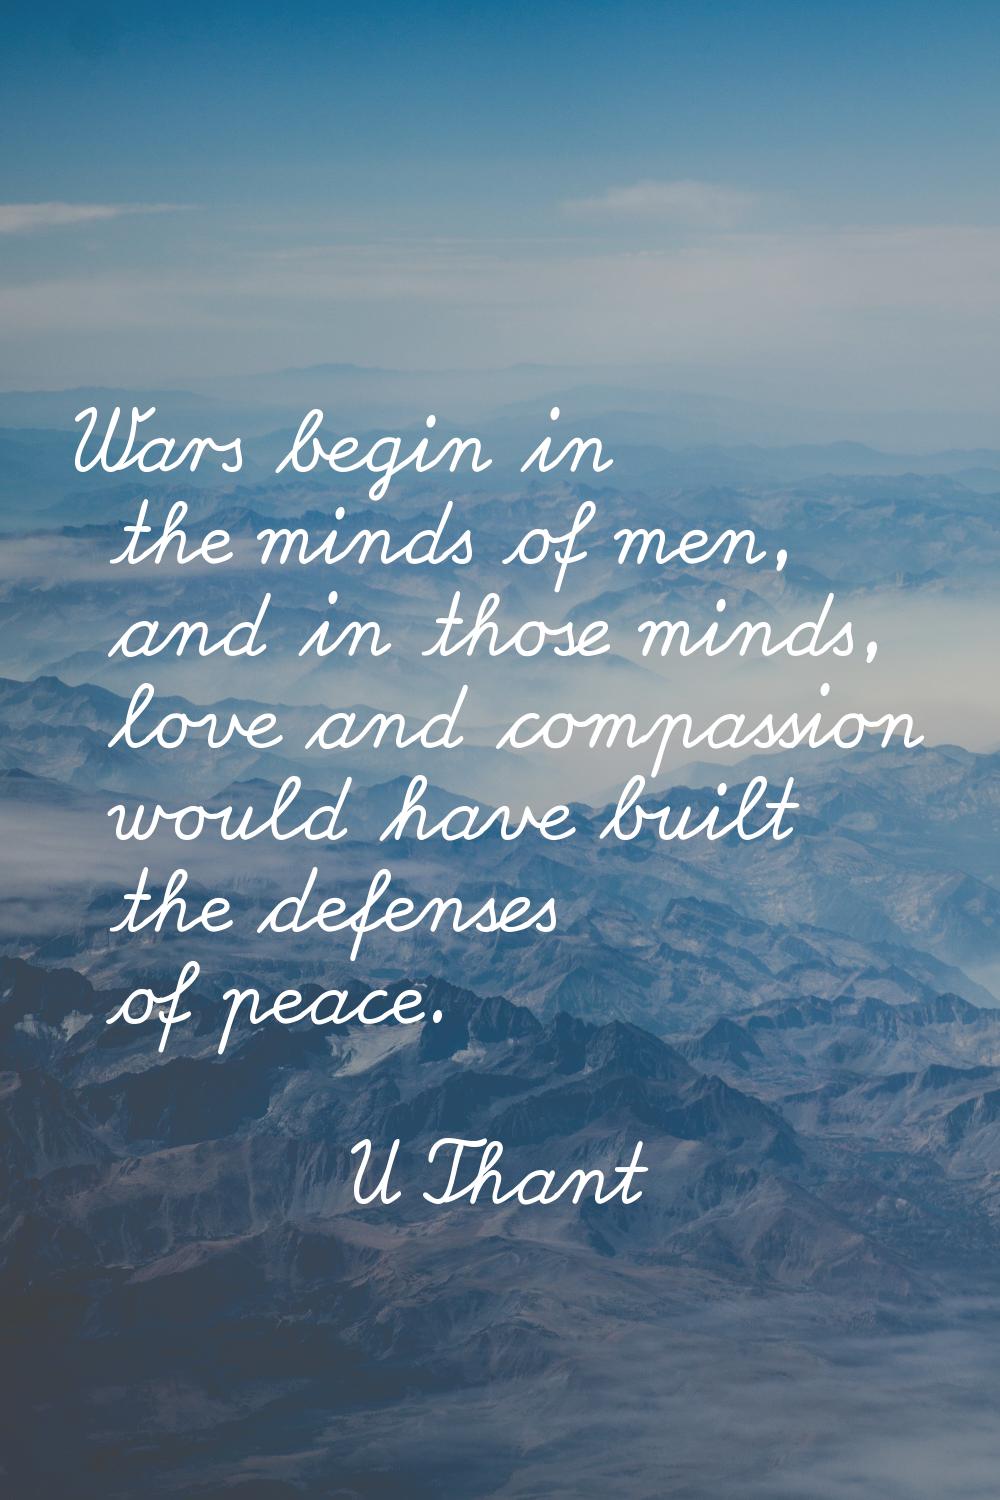 Wars begin in the minds of men, and in those minds, love and compassion would have built the defens